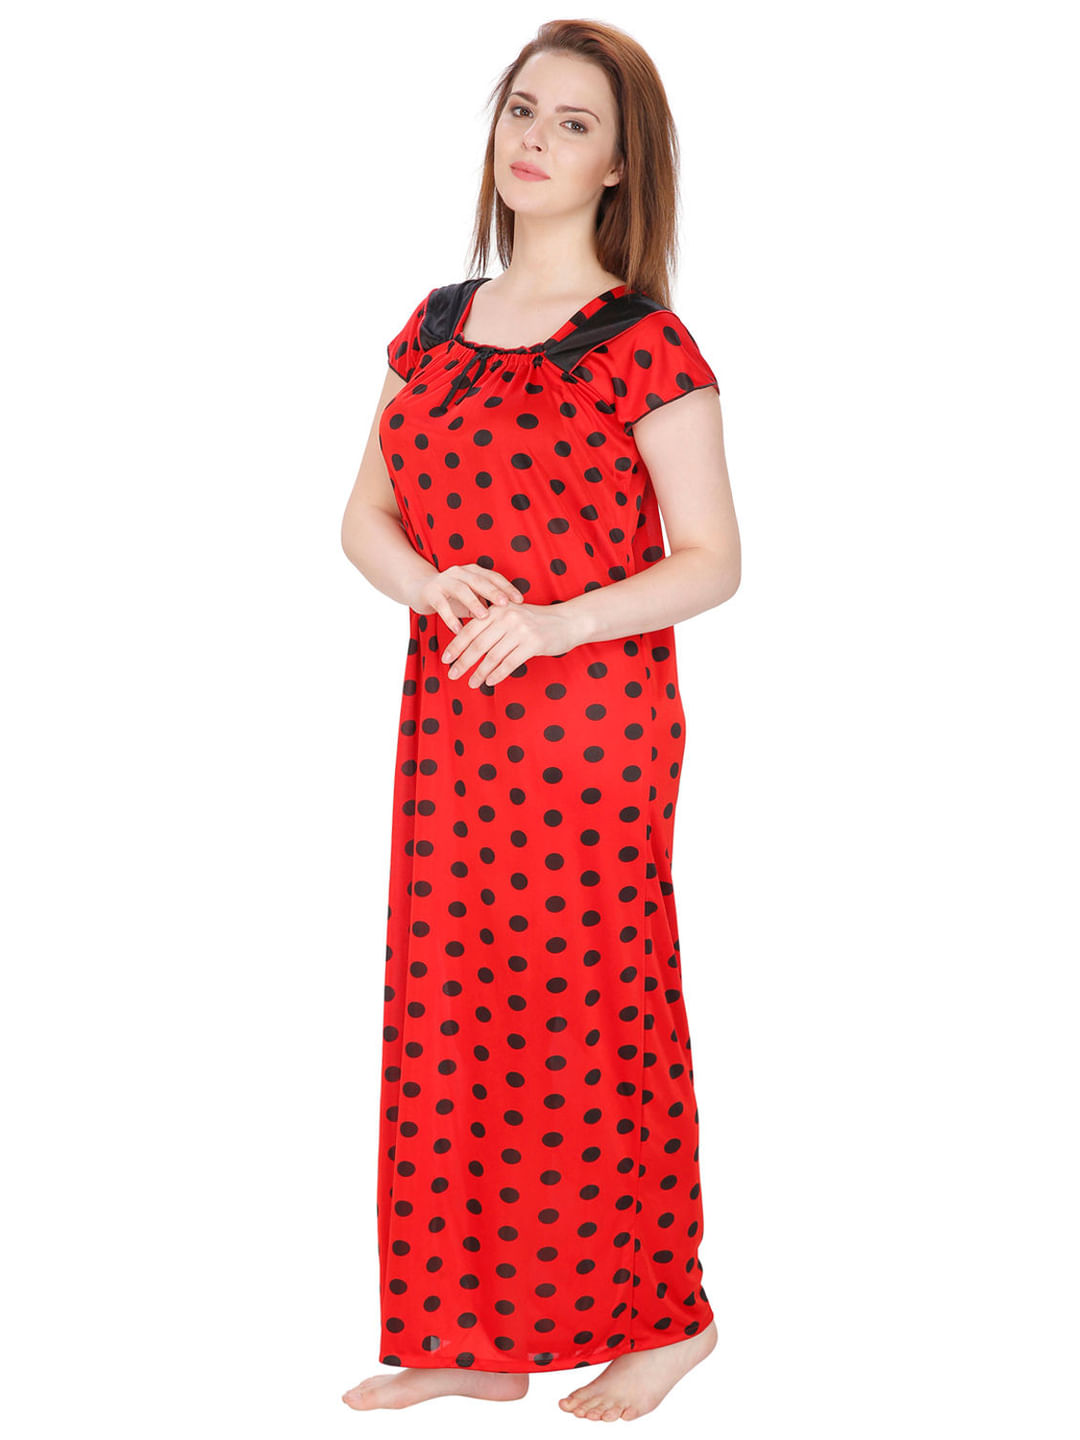 Satin Print Red Nighty (Red, Free Size)